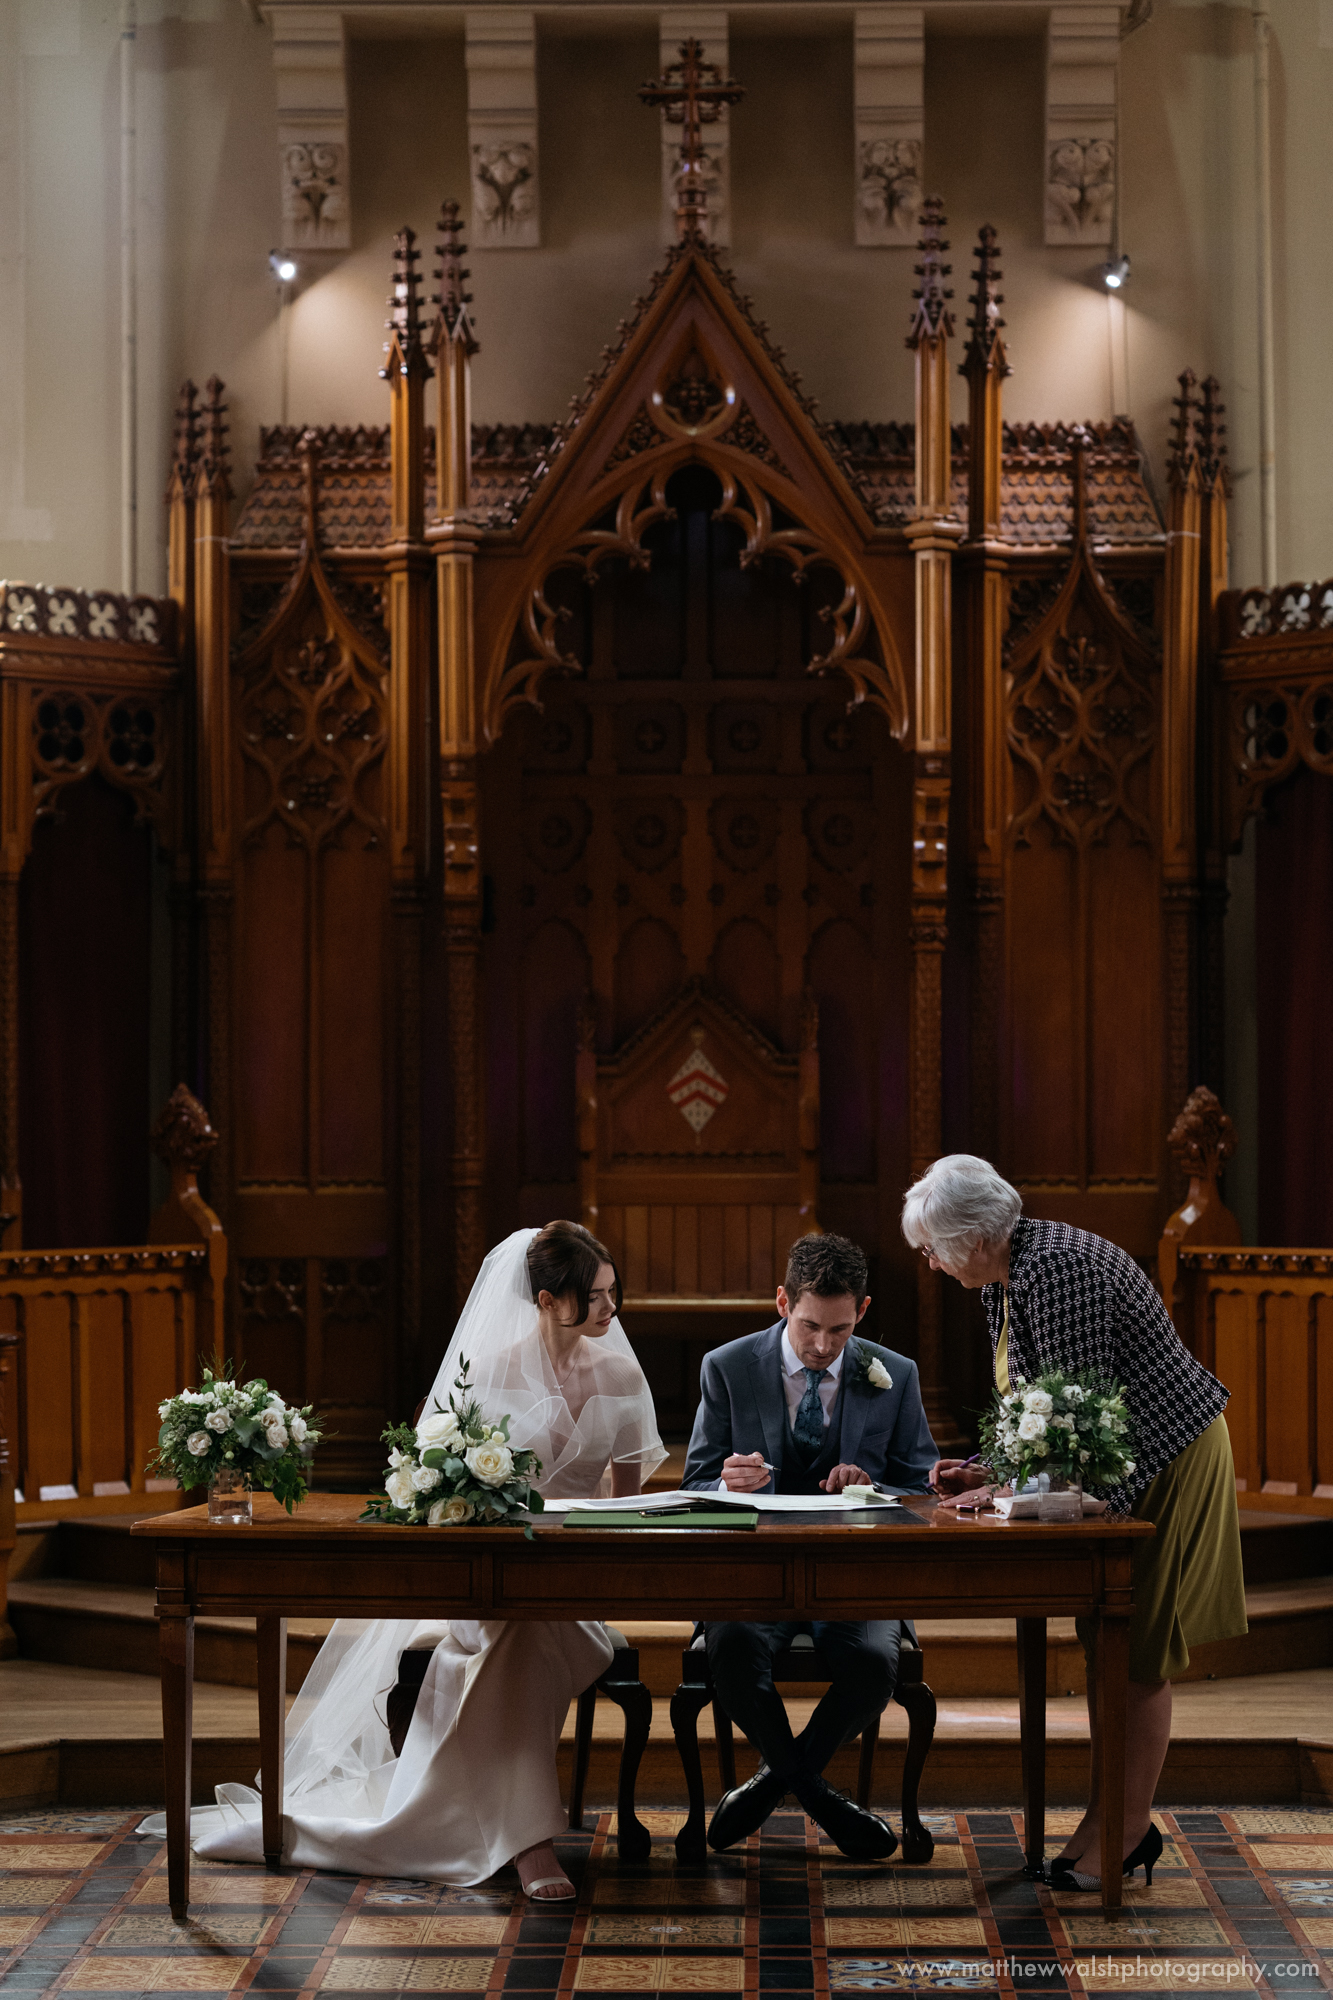 Signing the wedding register in the hall chapel at Stanbrook Abbey